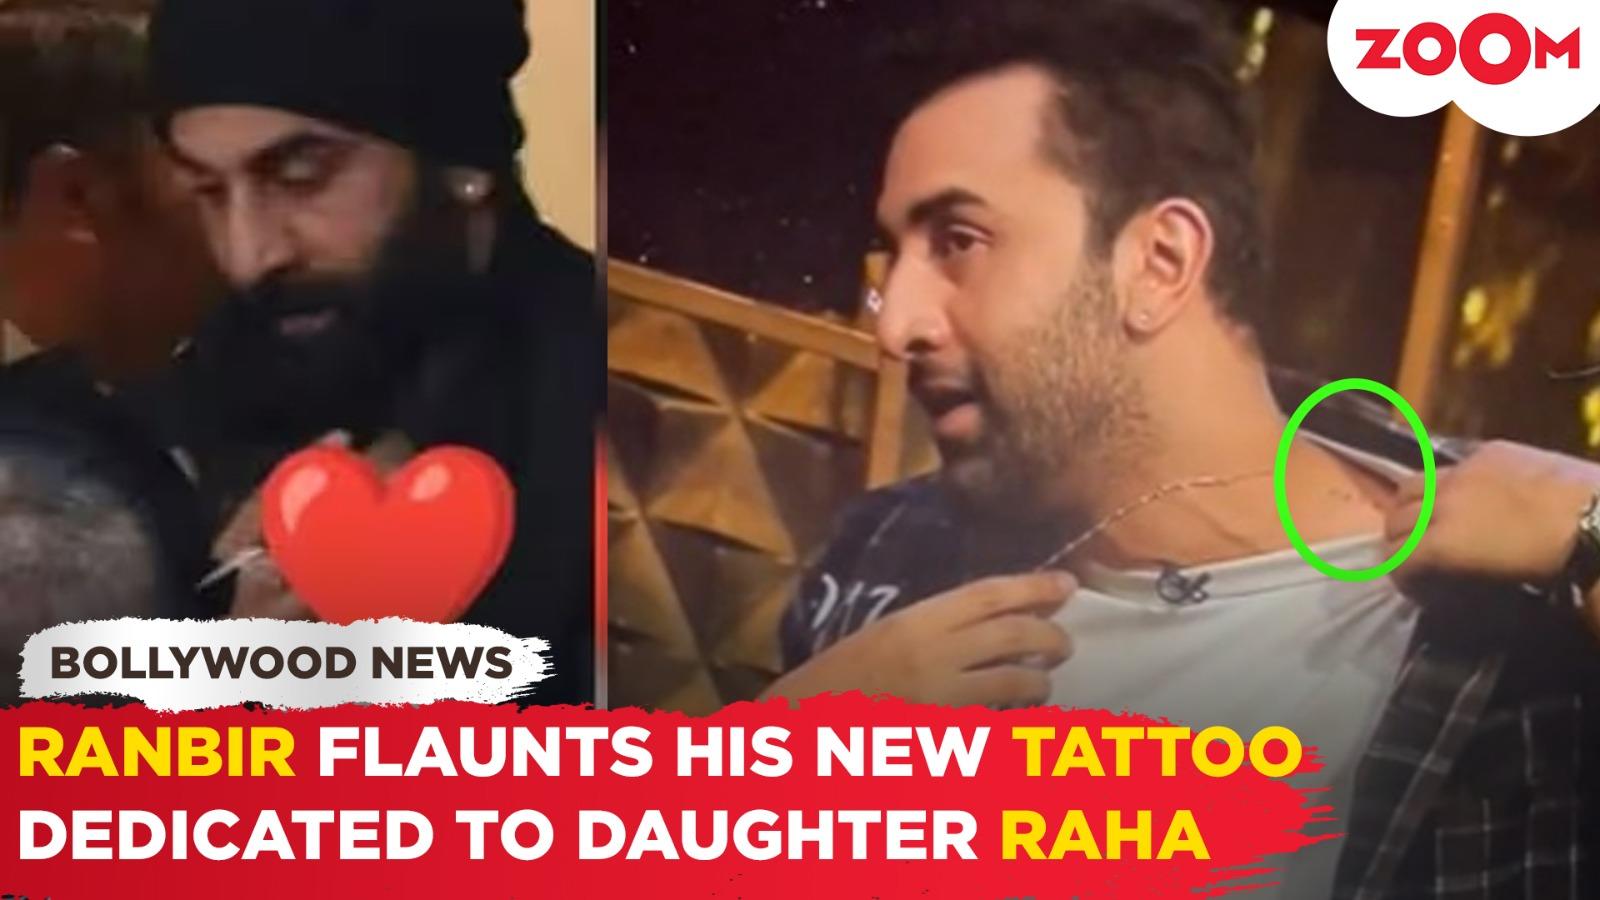 If You Have A Tattoo, The Indian Army May Reject You